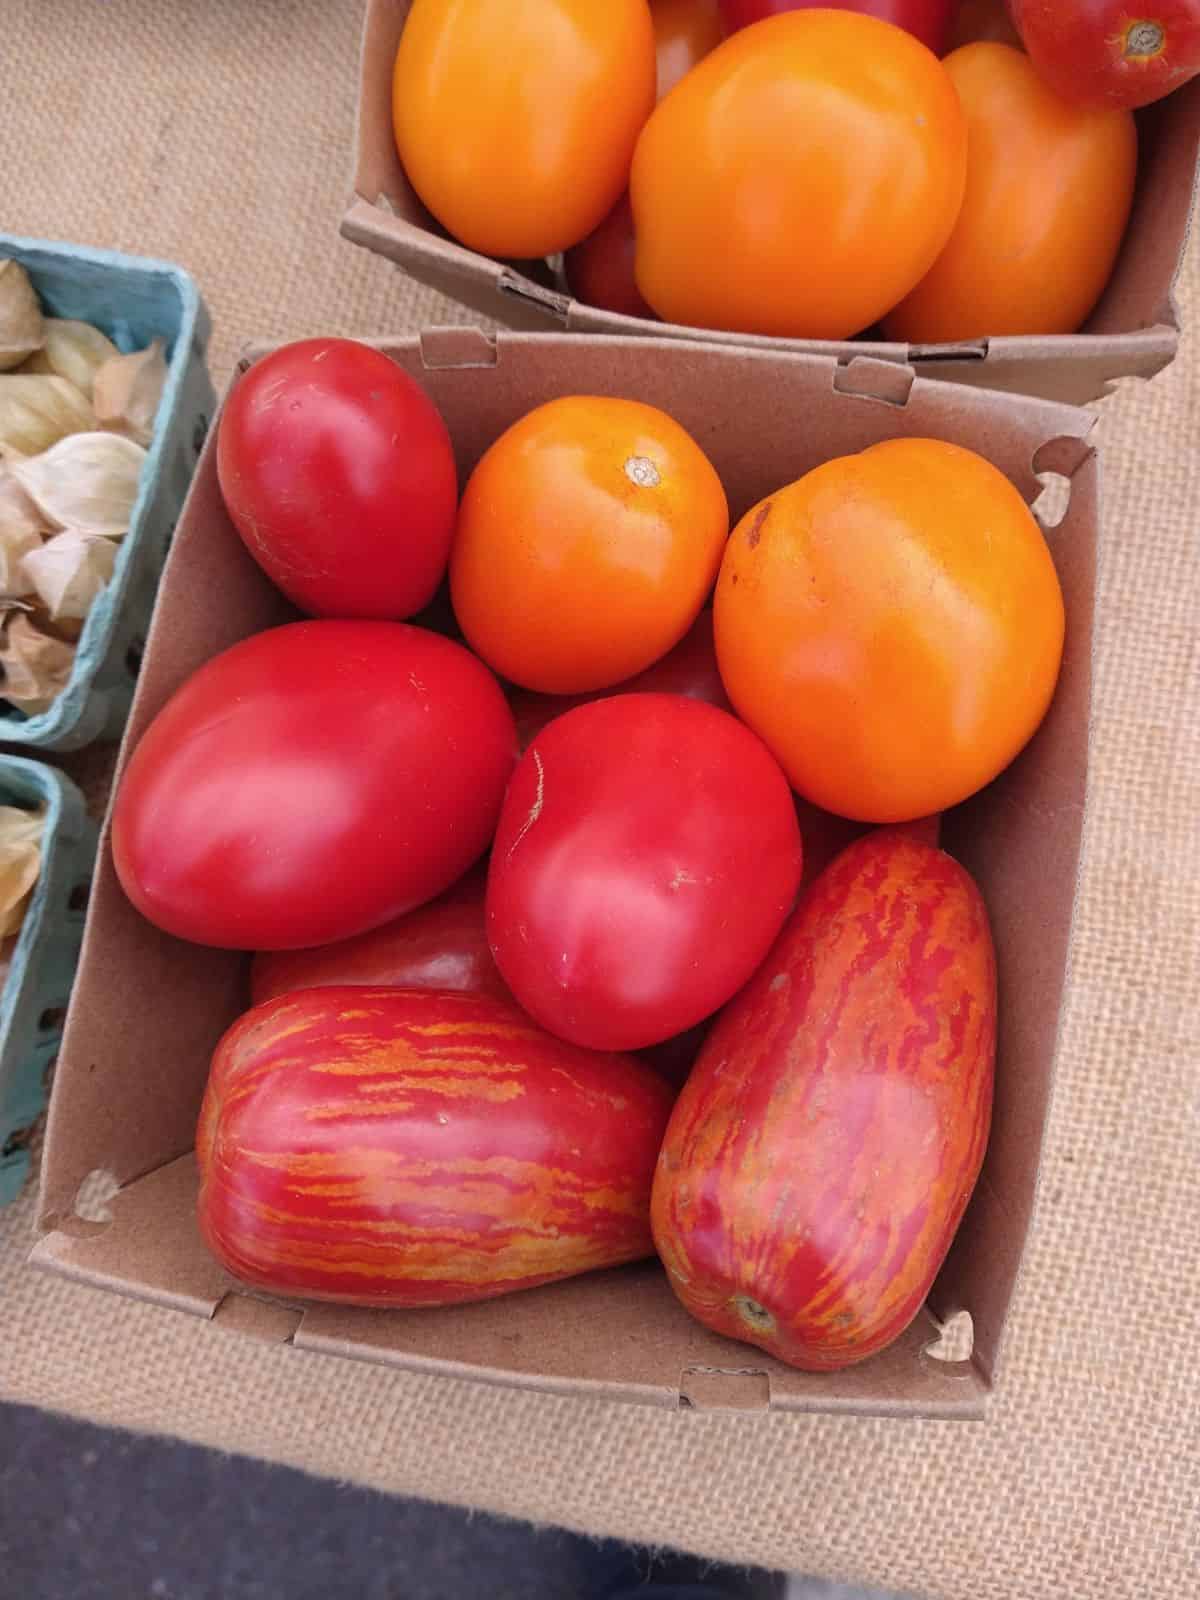 Small wood boxes of red and orange colored tomatoes